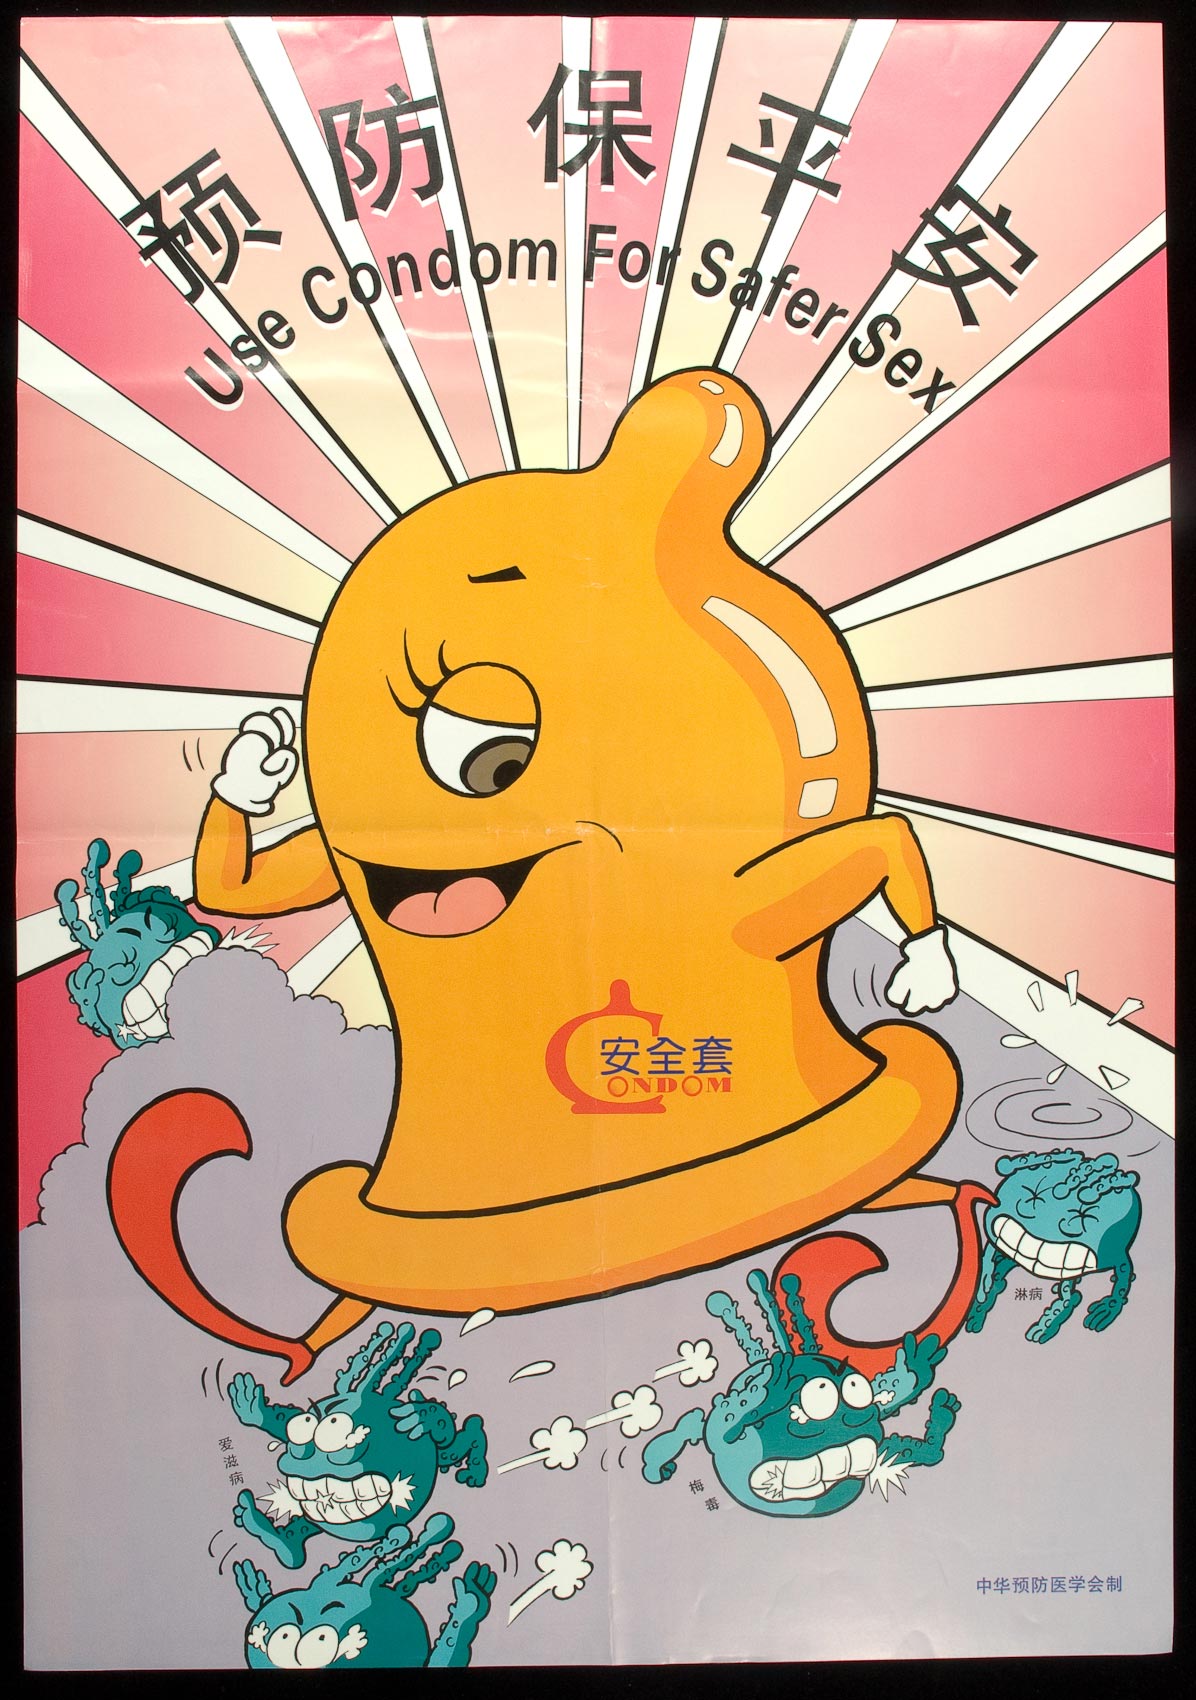 A cute condom with a smiling face and funny legs confidently strides through some weird-looking viruses. English text states: Use condoms for safer sex.